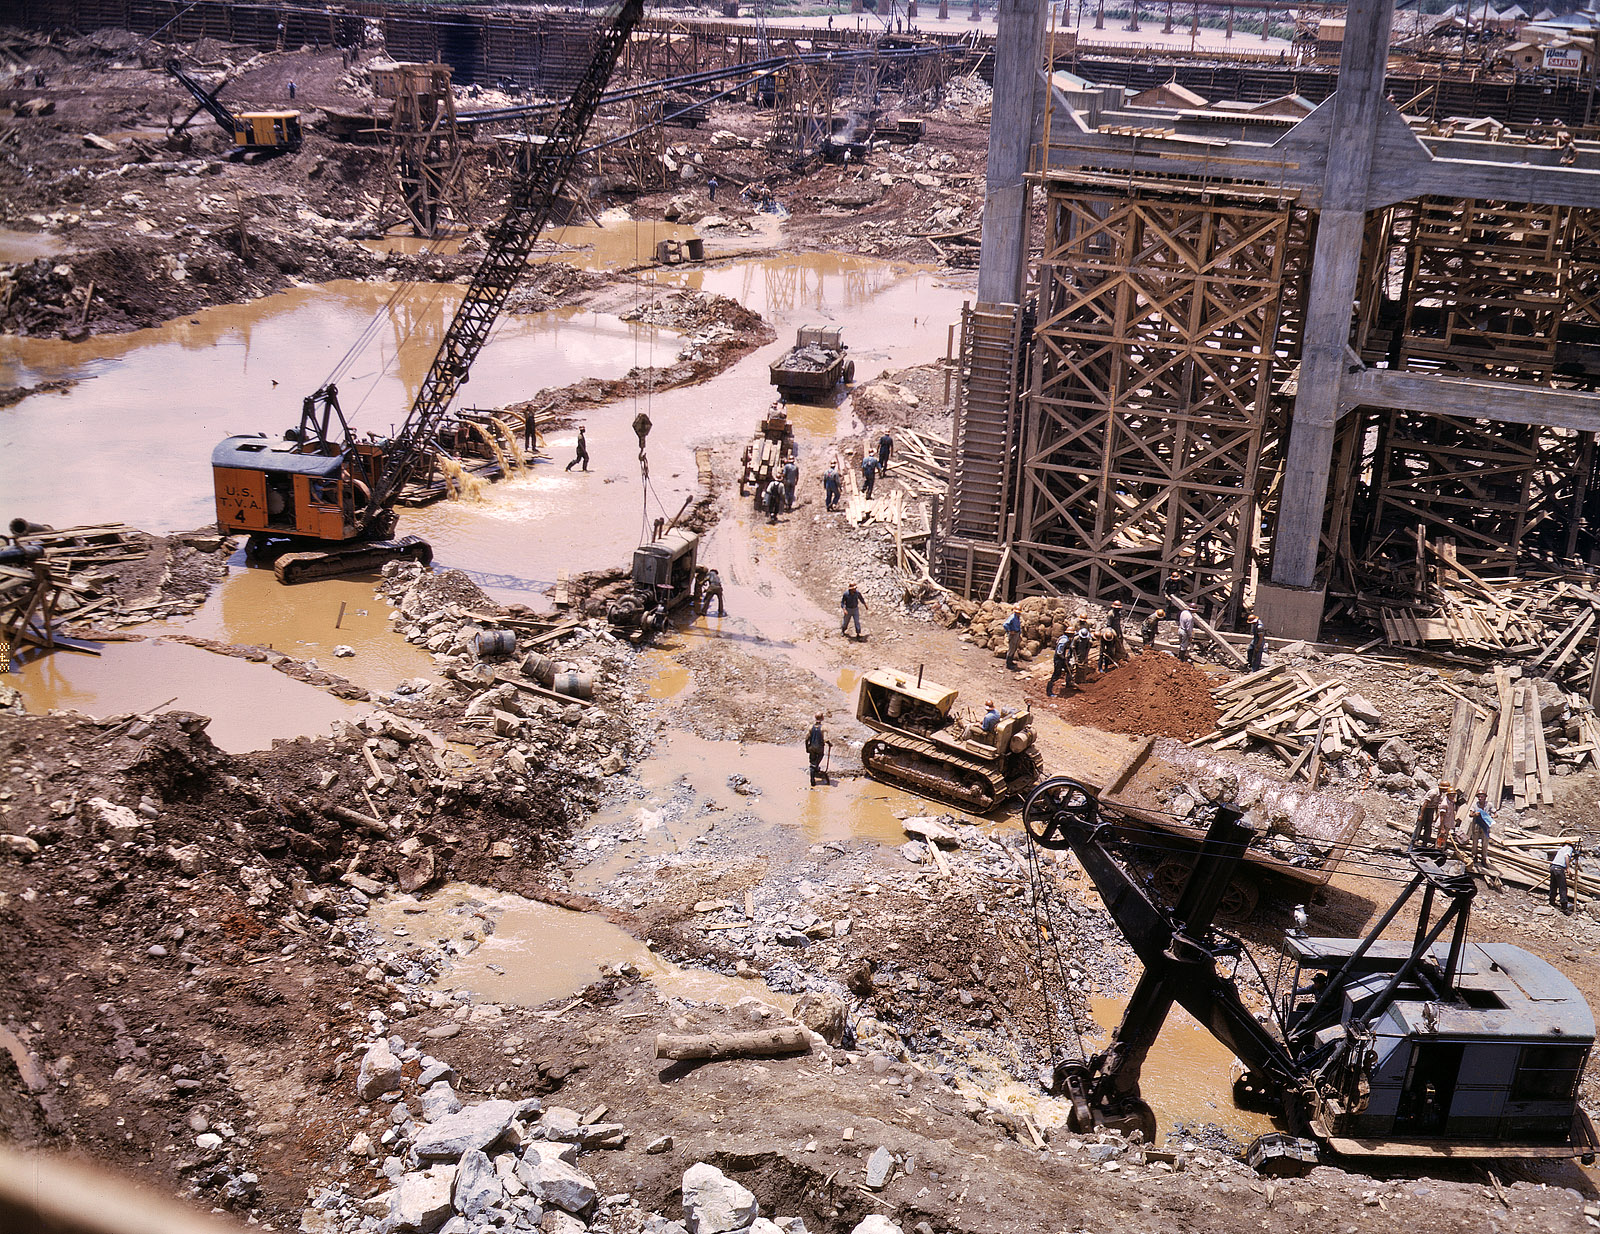 June 1942. Construction work at the Tennessee Valley Authority's Douglas Dam. View full size. 4x5 Kodachrome transparency by Alfred Palmer.